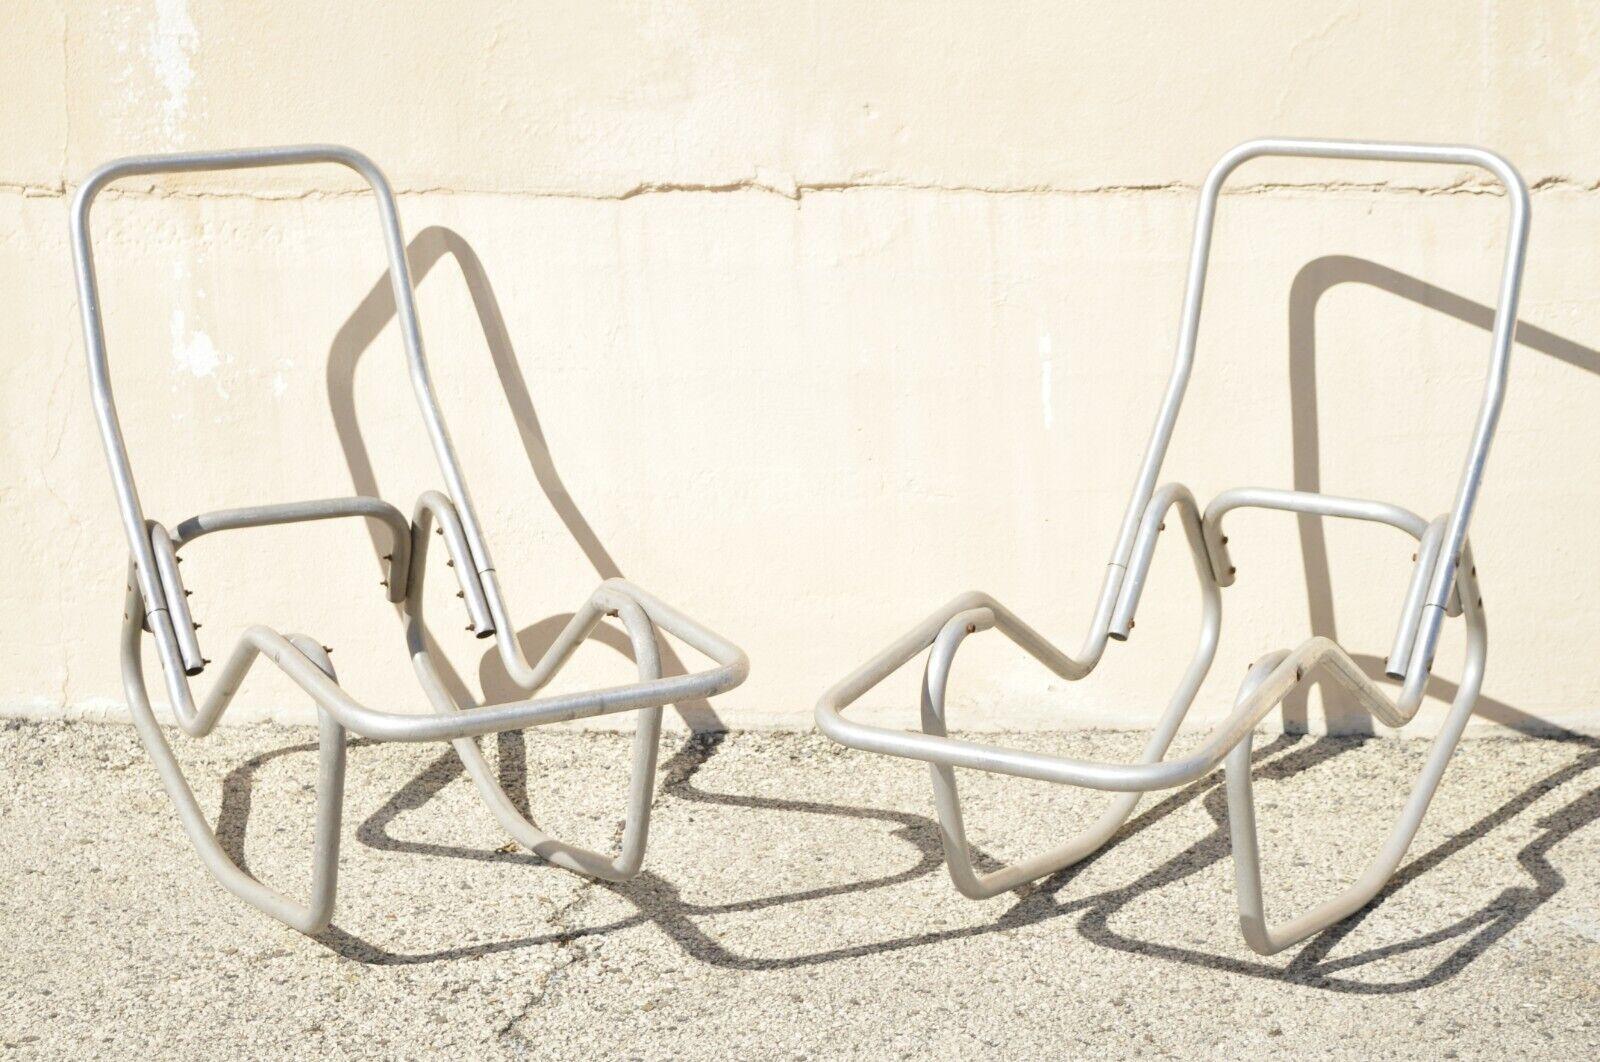 Vintage English Bartolucci for Barwa Aluminum Frame Rocking Pool Chaise Lounge Chair - a Pair. Item featured is designed by Edgar Bartolucci for Barwa, aluminum metal rocking frames, clean modernist lines, sleek sculptural form. Circa 1950.